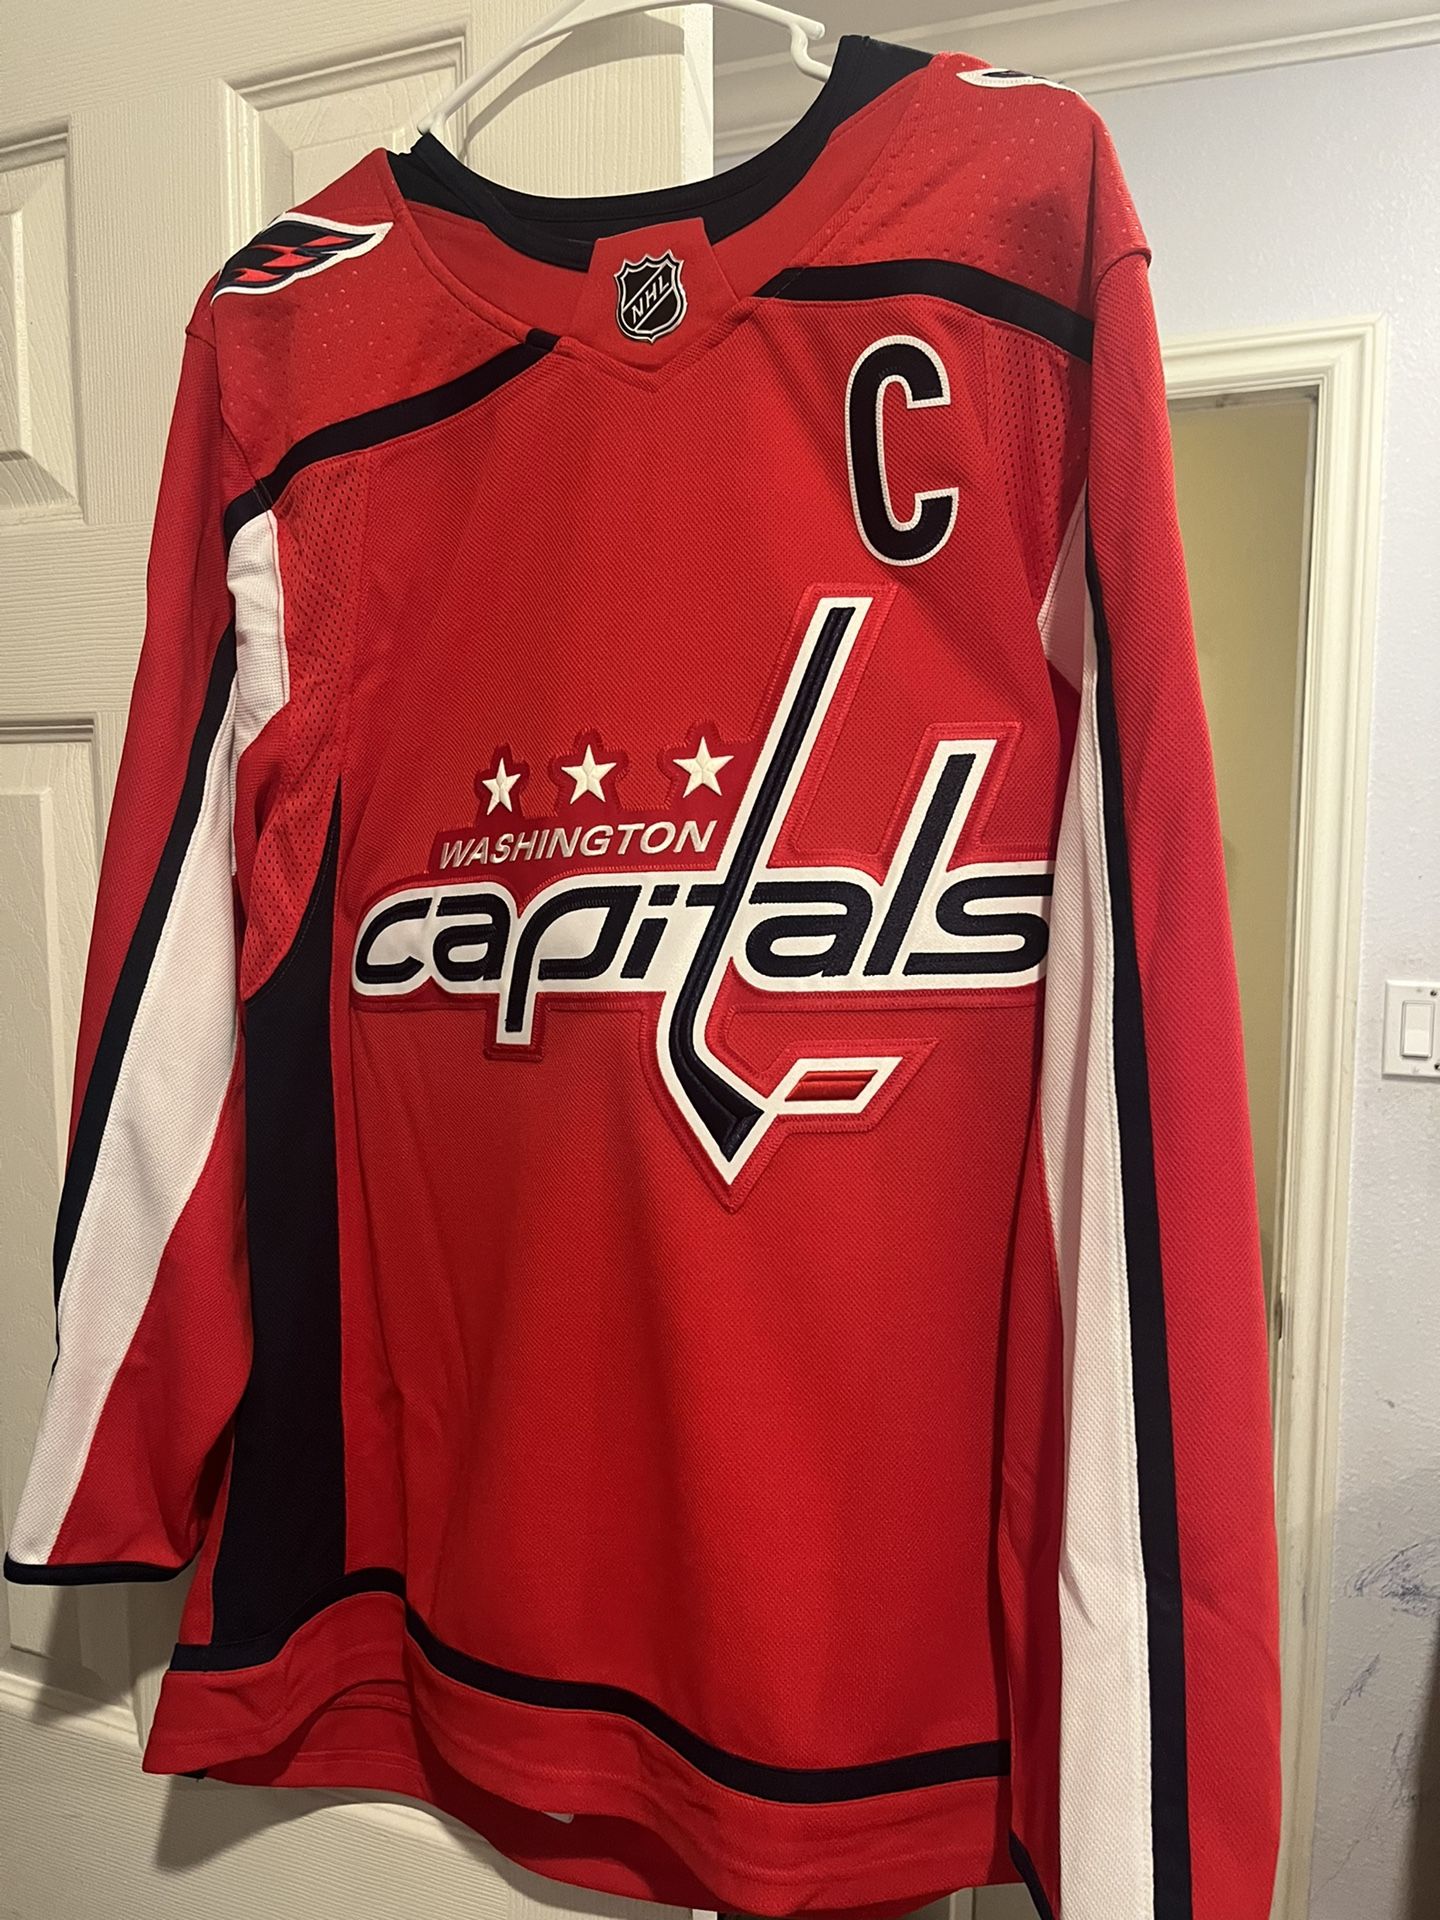 Alex Ovechkin Adidas Jersey for Sale in New York, NY - OfferUp